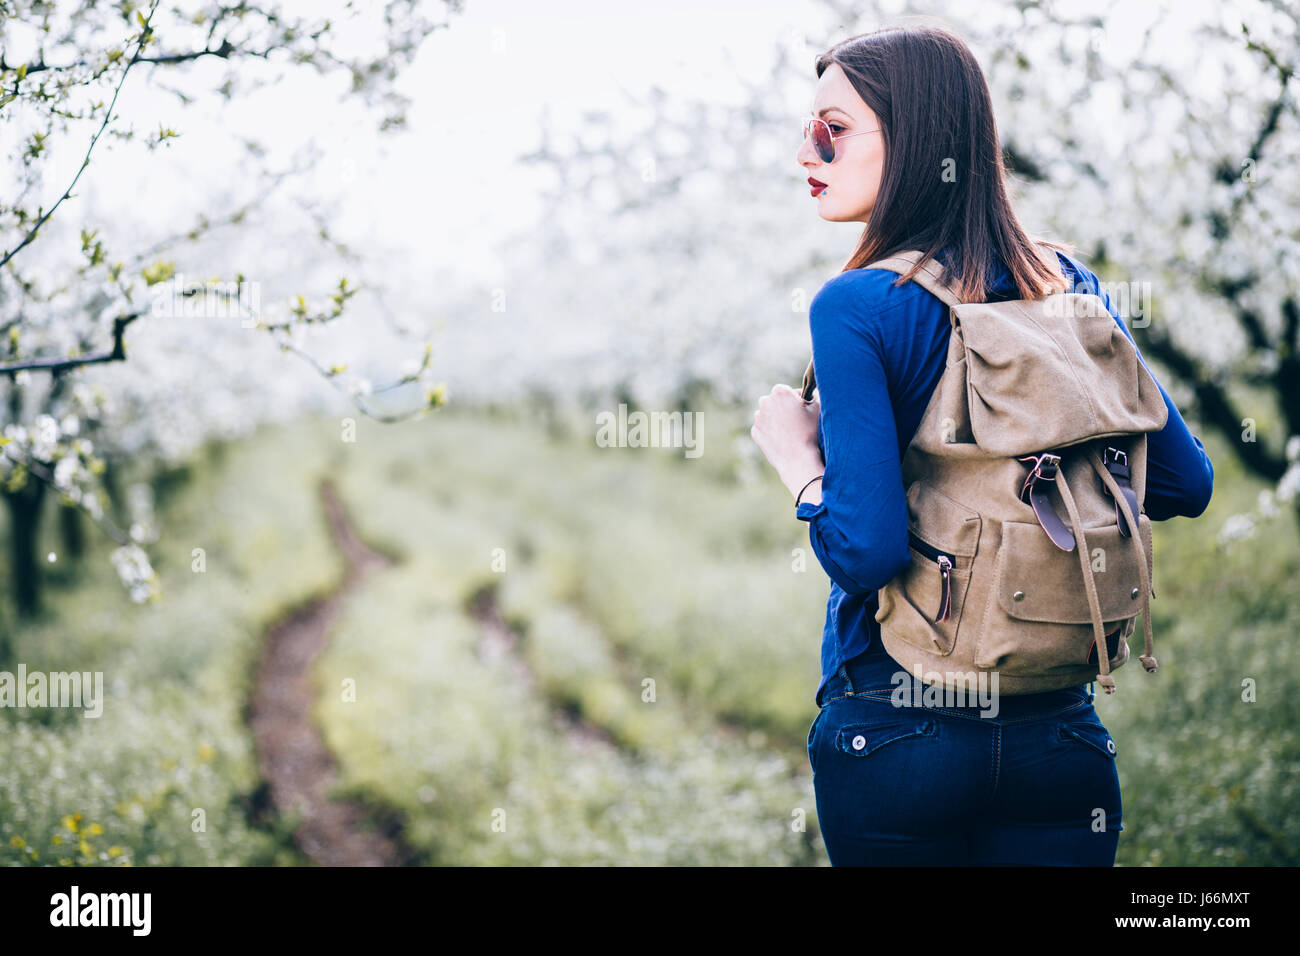 Young woman walking in nature Stock Photo